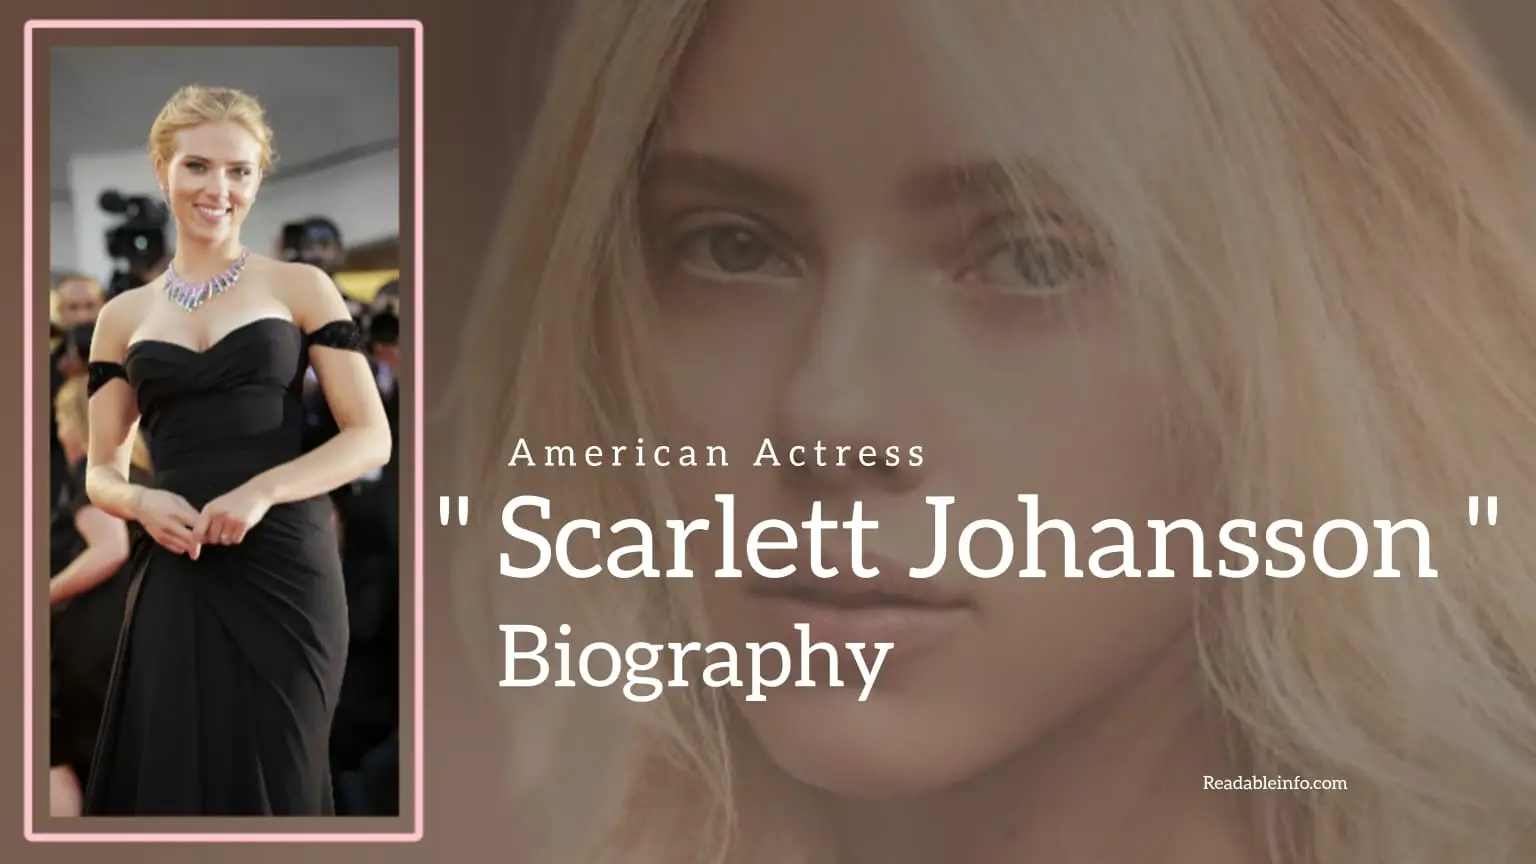 You are currently viewing Scarlett Johansson Biography (American Actress)